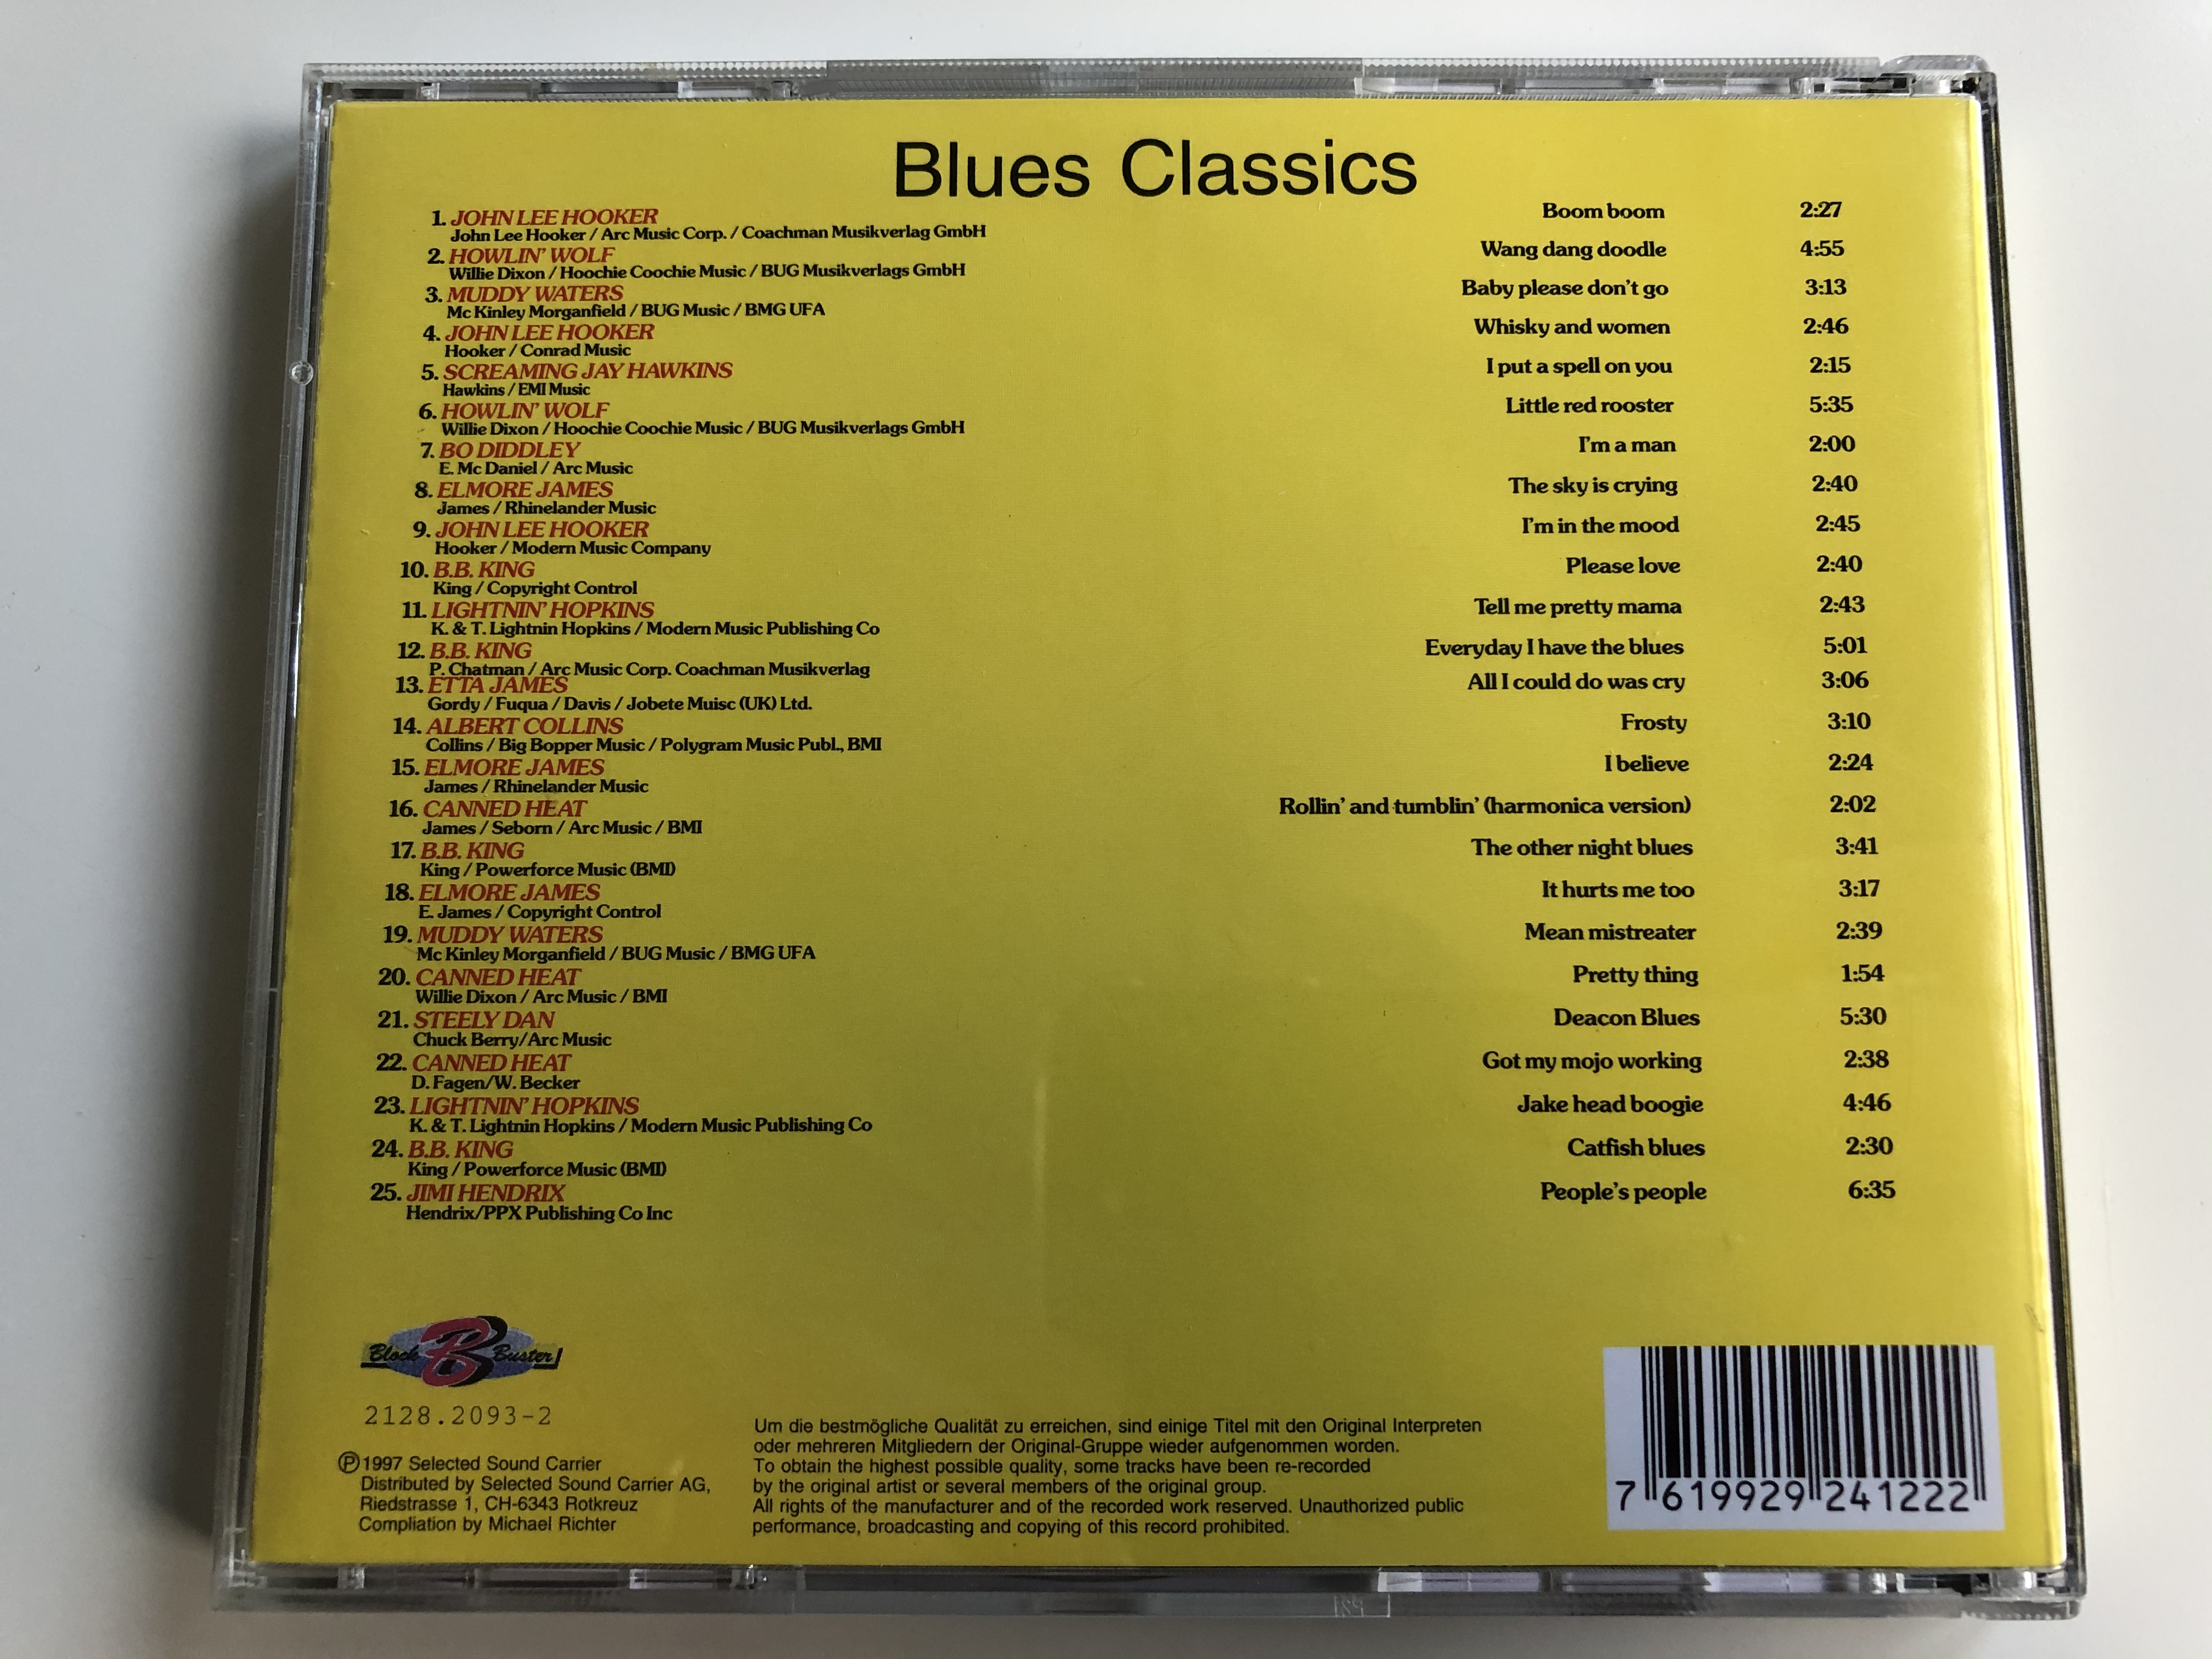 from-blues-to-beat-small-faces-lazy-sunday-humble-pie-natural-born-boogie-amen-corner-hello-susie-nice-america-chris-farlowe-out-of-time-joni-mitchell-big-yellow-taxi-selected-12-.jpg